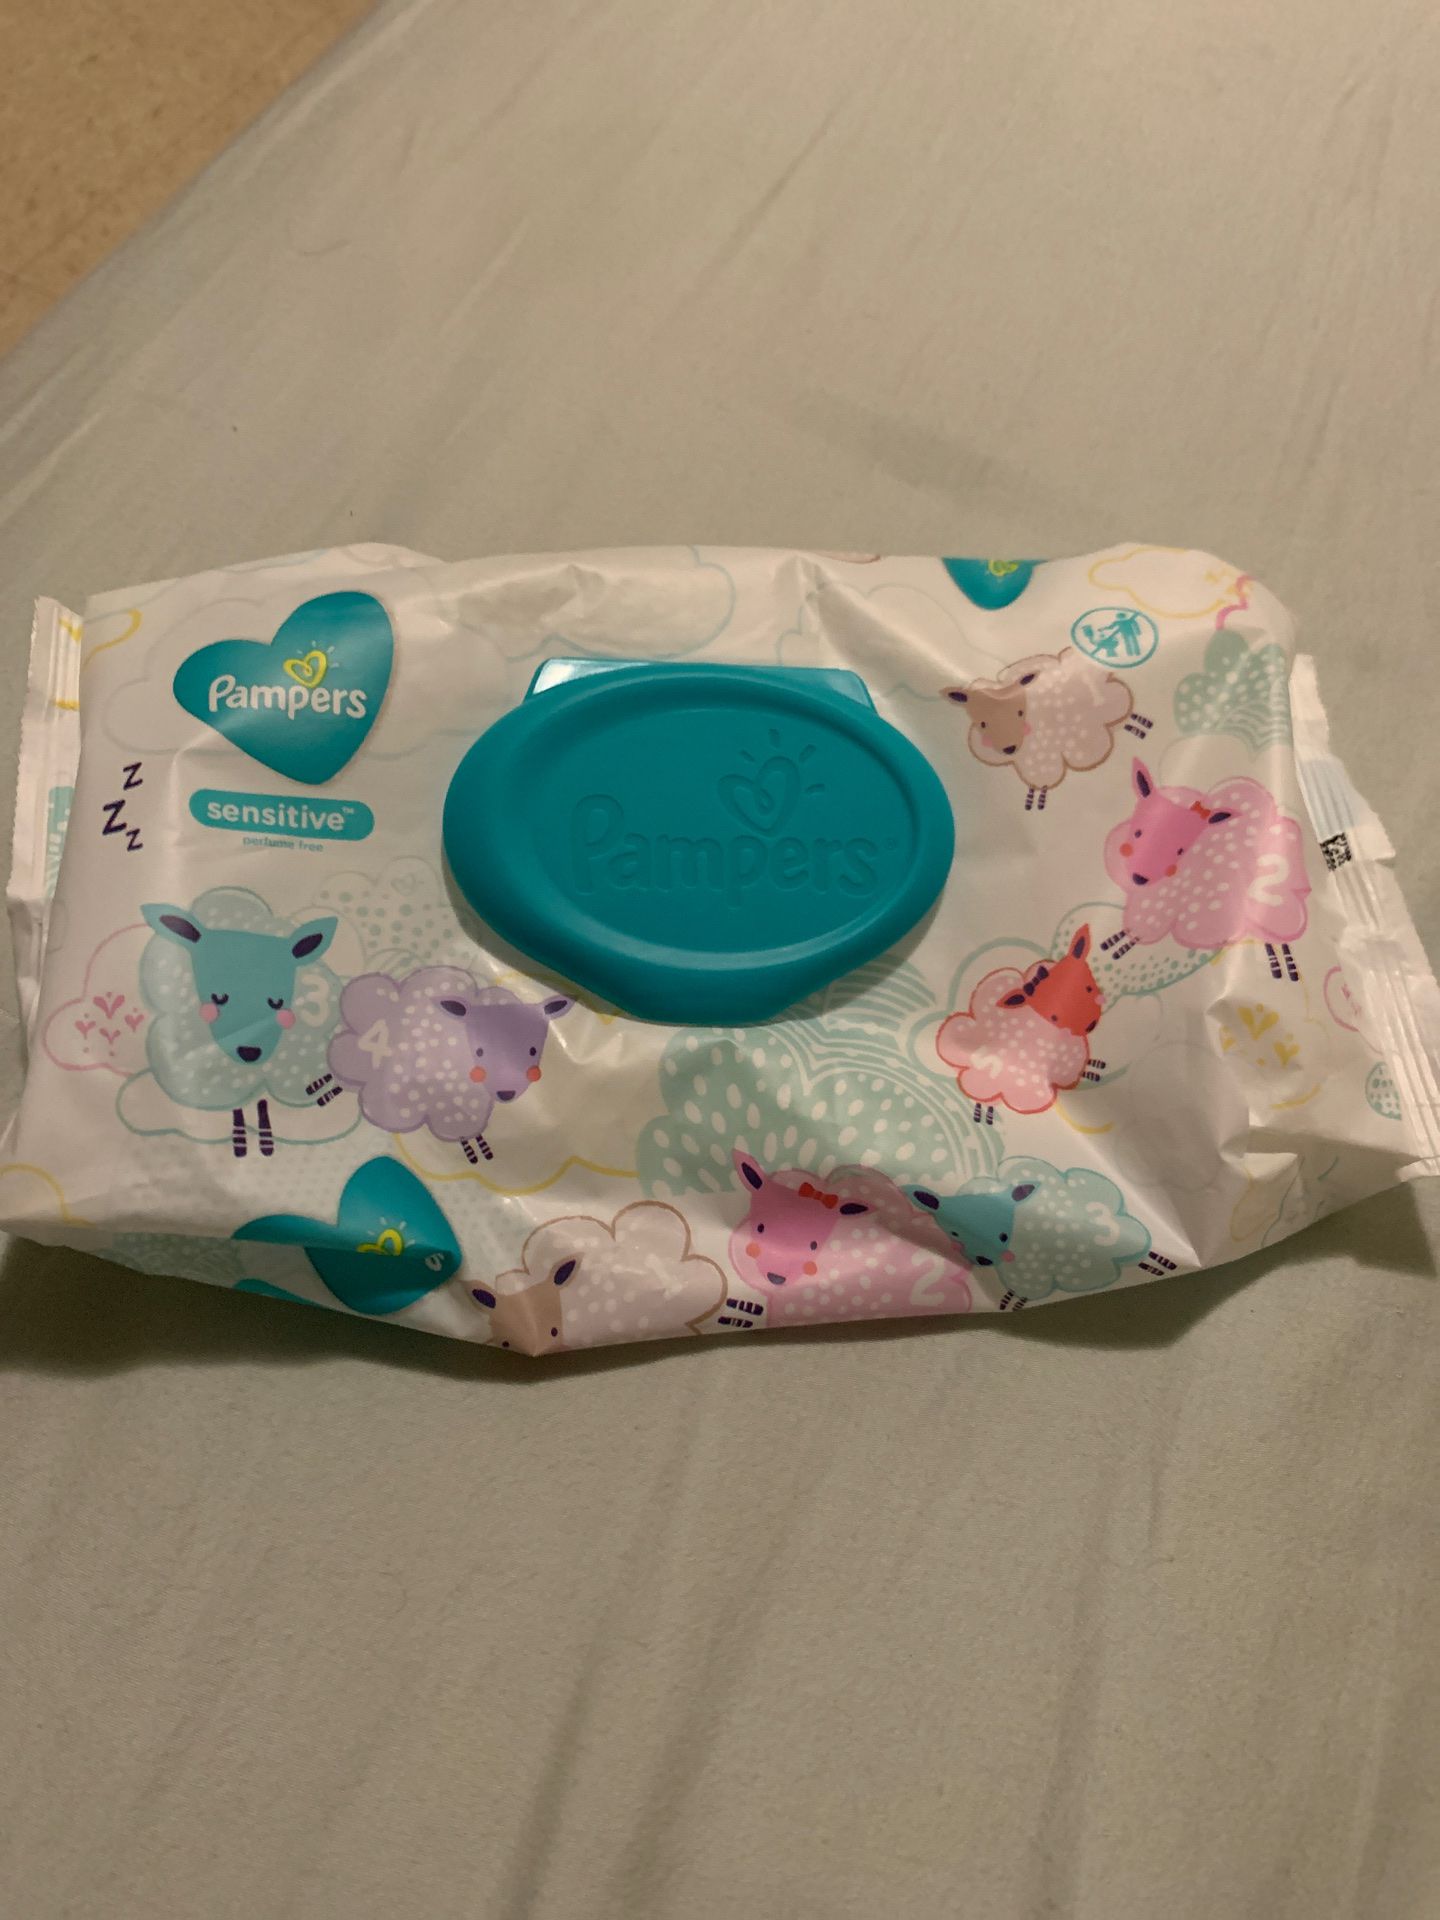 Pampers wipe